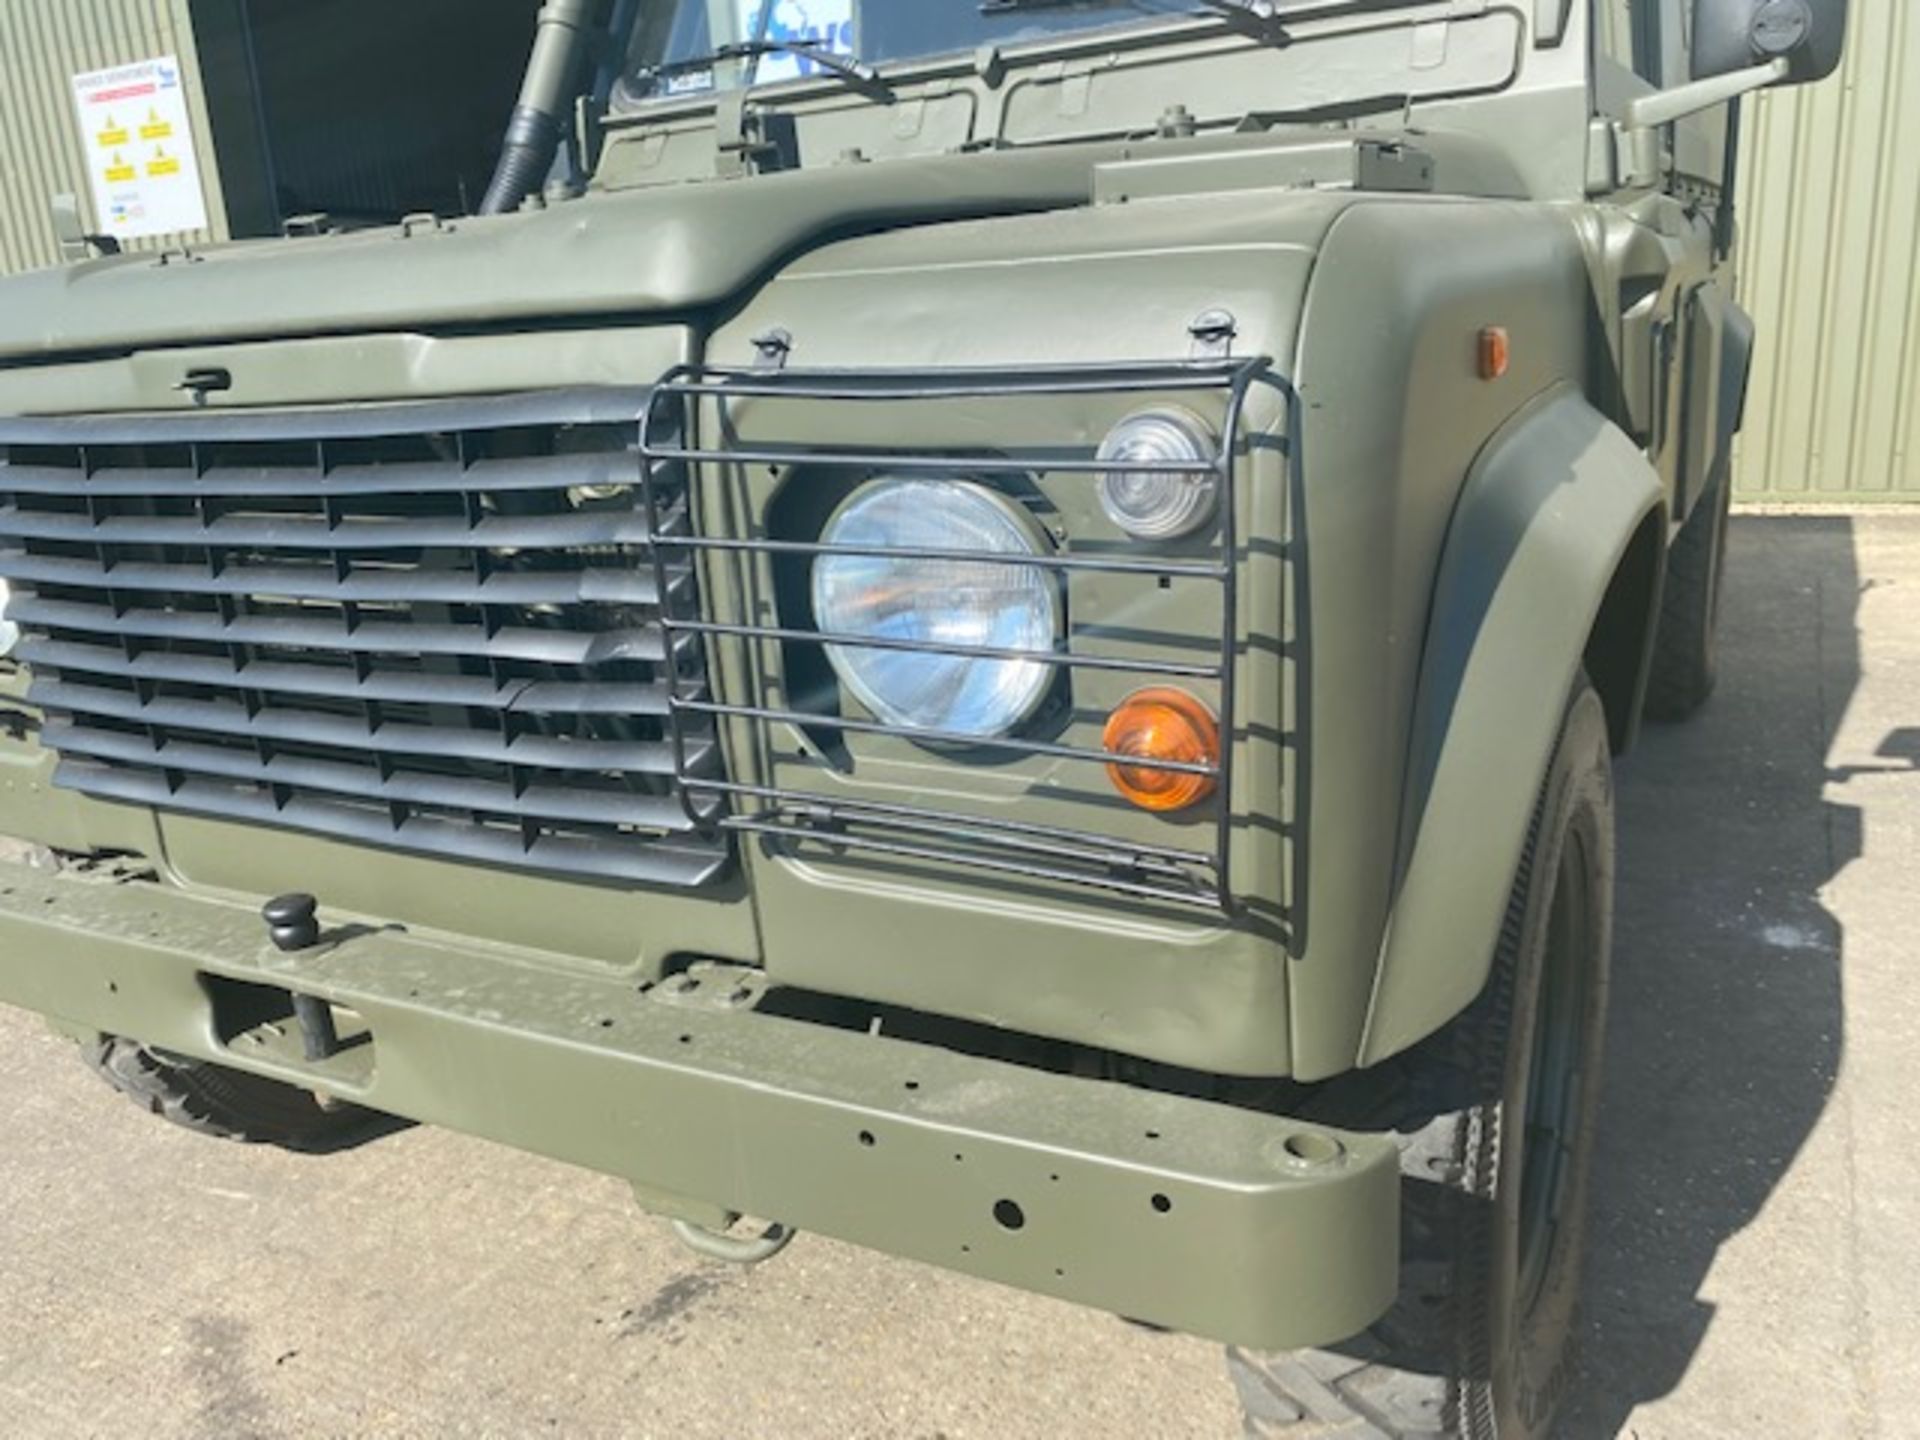 1997 Military Specification Left Hand Drive Land Rover Wolf 110 FFR Hard Top ONLY 172,783Km - Image 14 of 50